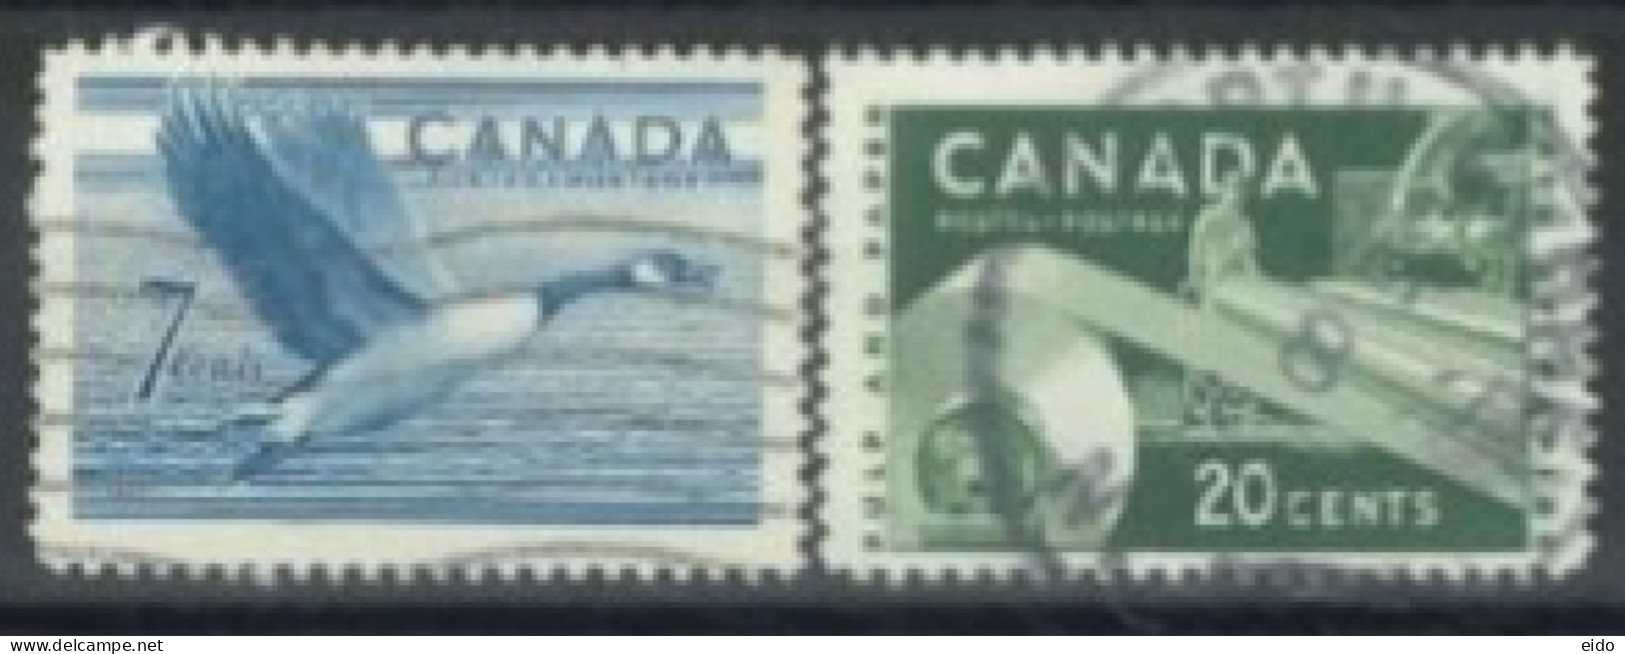 CANADA - 1952/53, CANADIAN GOOSE & PULP & PAPER INDUSTRY. STAMPS SET OF 2, USED. - Usati